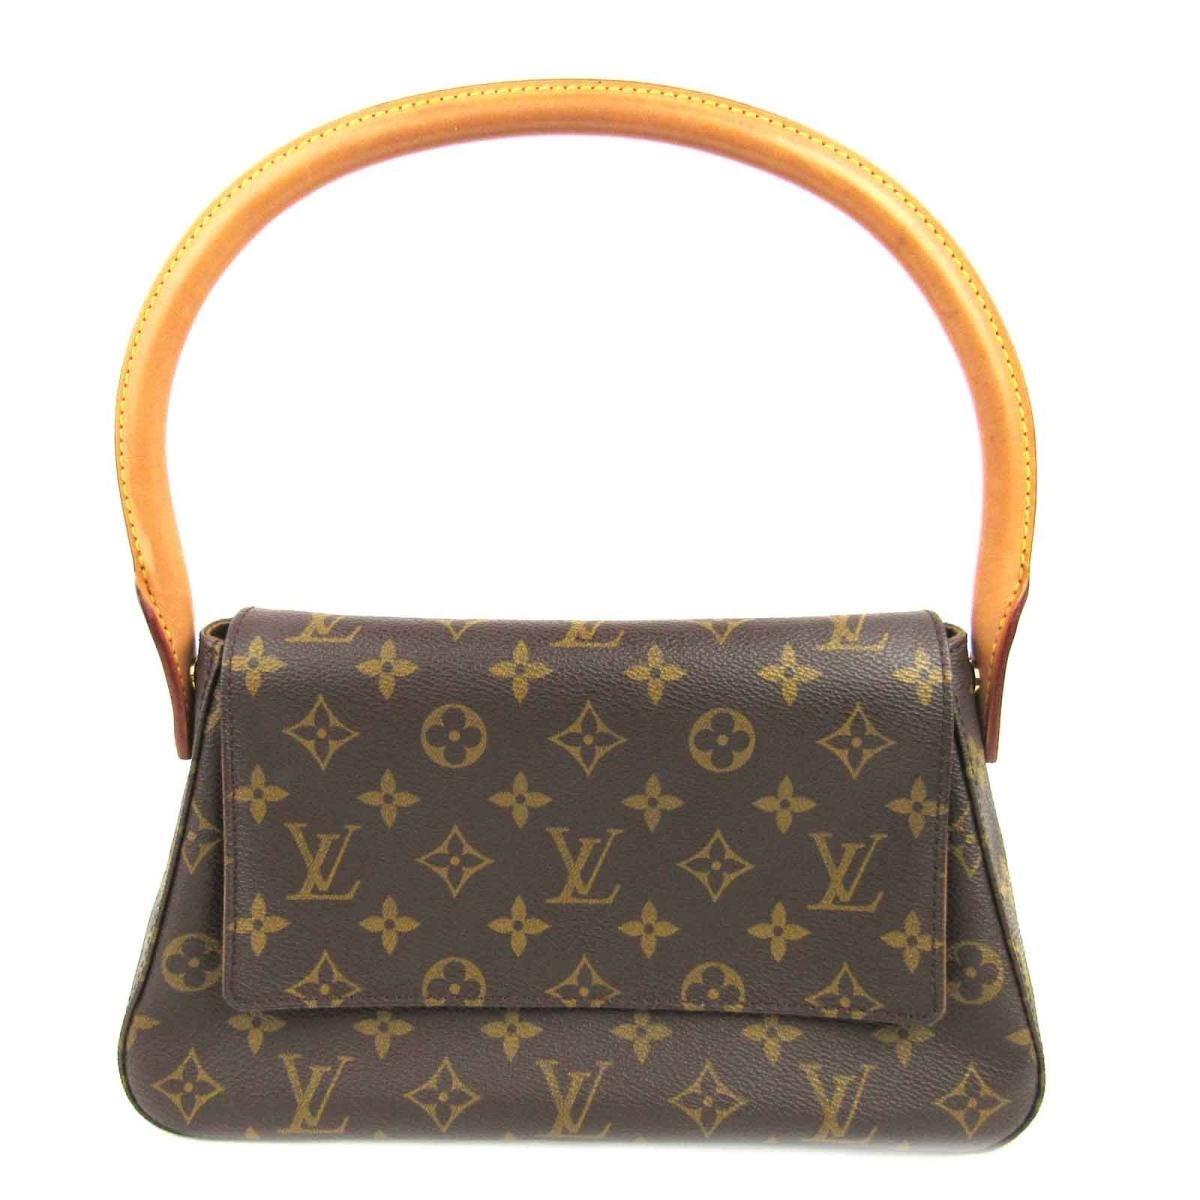 Louis Vuitton Monogram Bandouliere Strap With Yellow and Blue - A